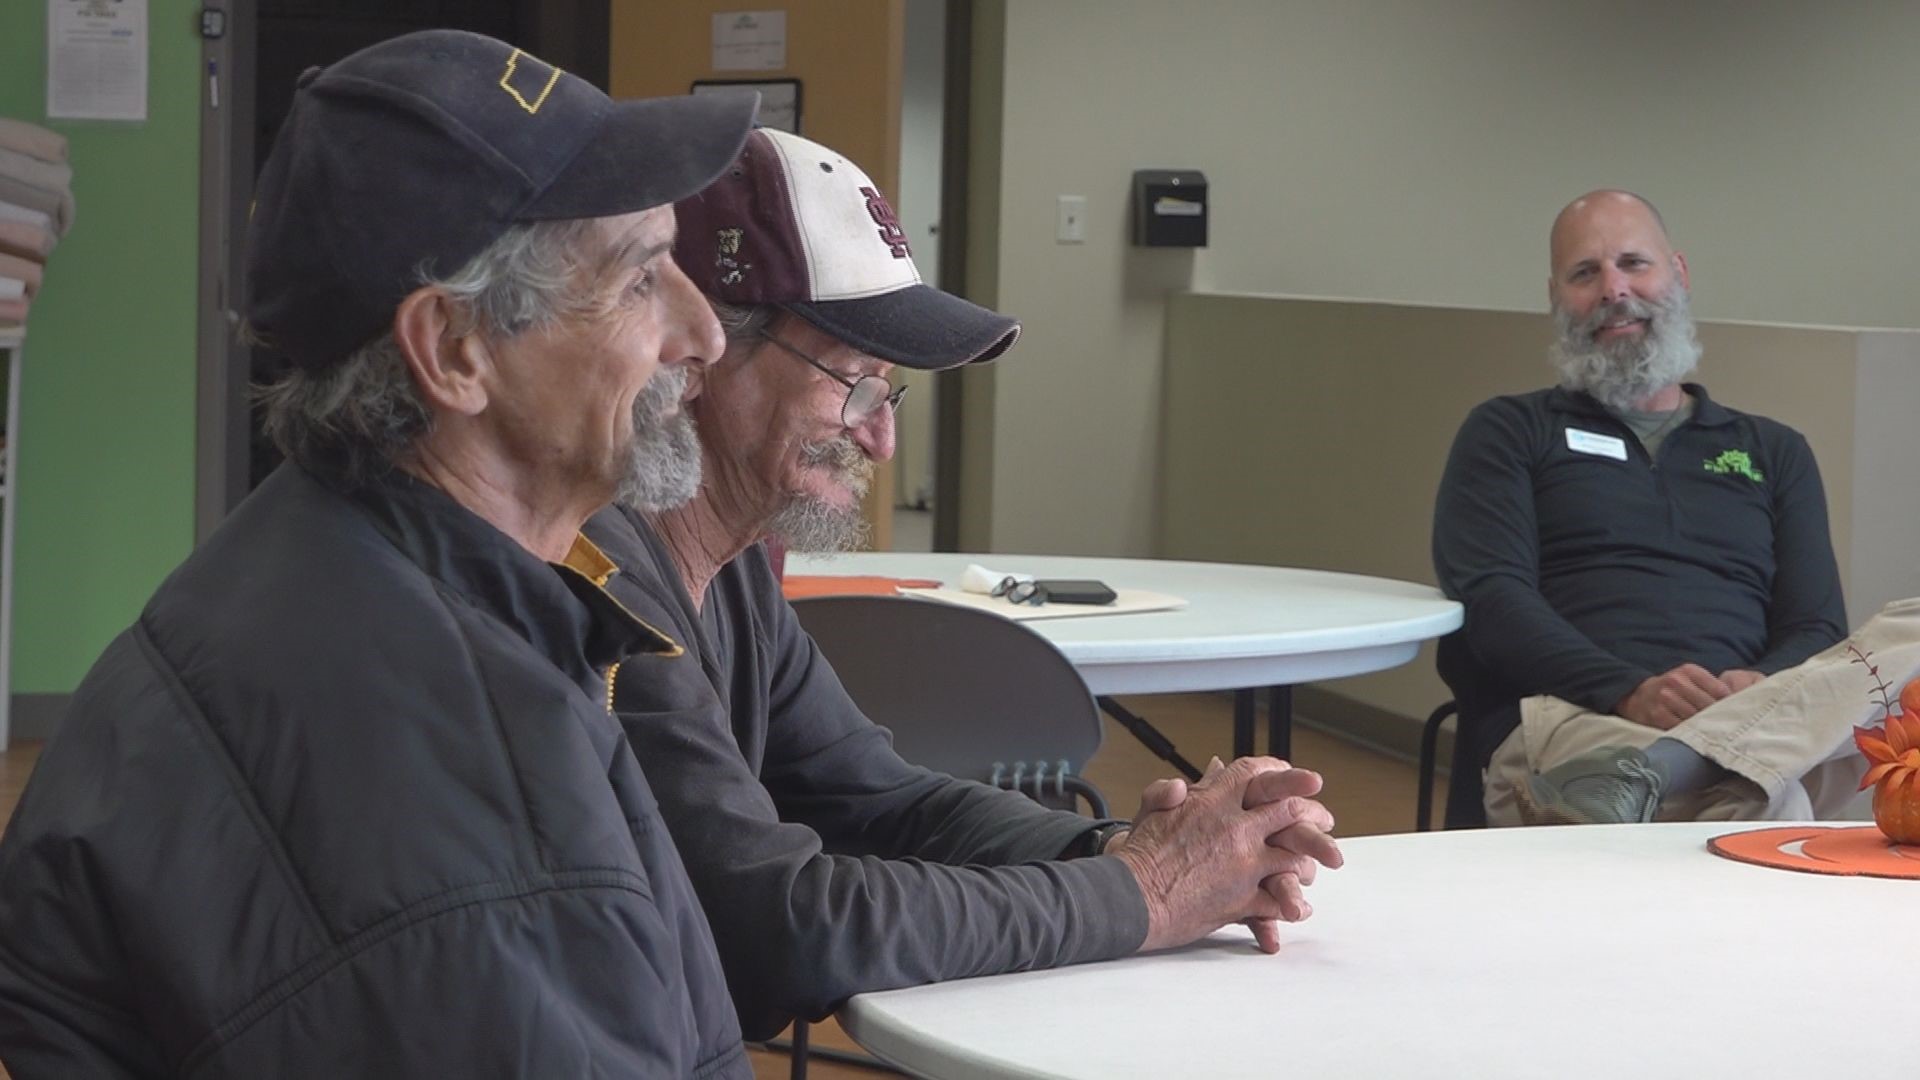 In 2021, 10News interviewed two men experiencing homelessness. In 2022, both men are in homes thanks to the help of the CAC and Cokesbury Church's Fig Tree space.